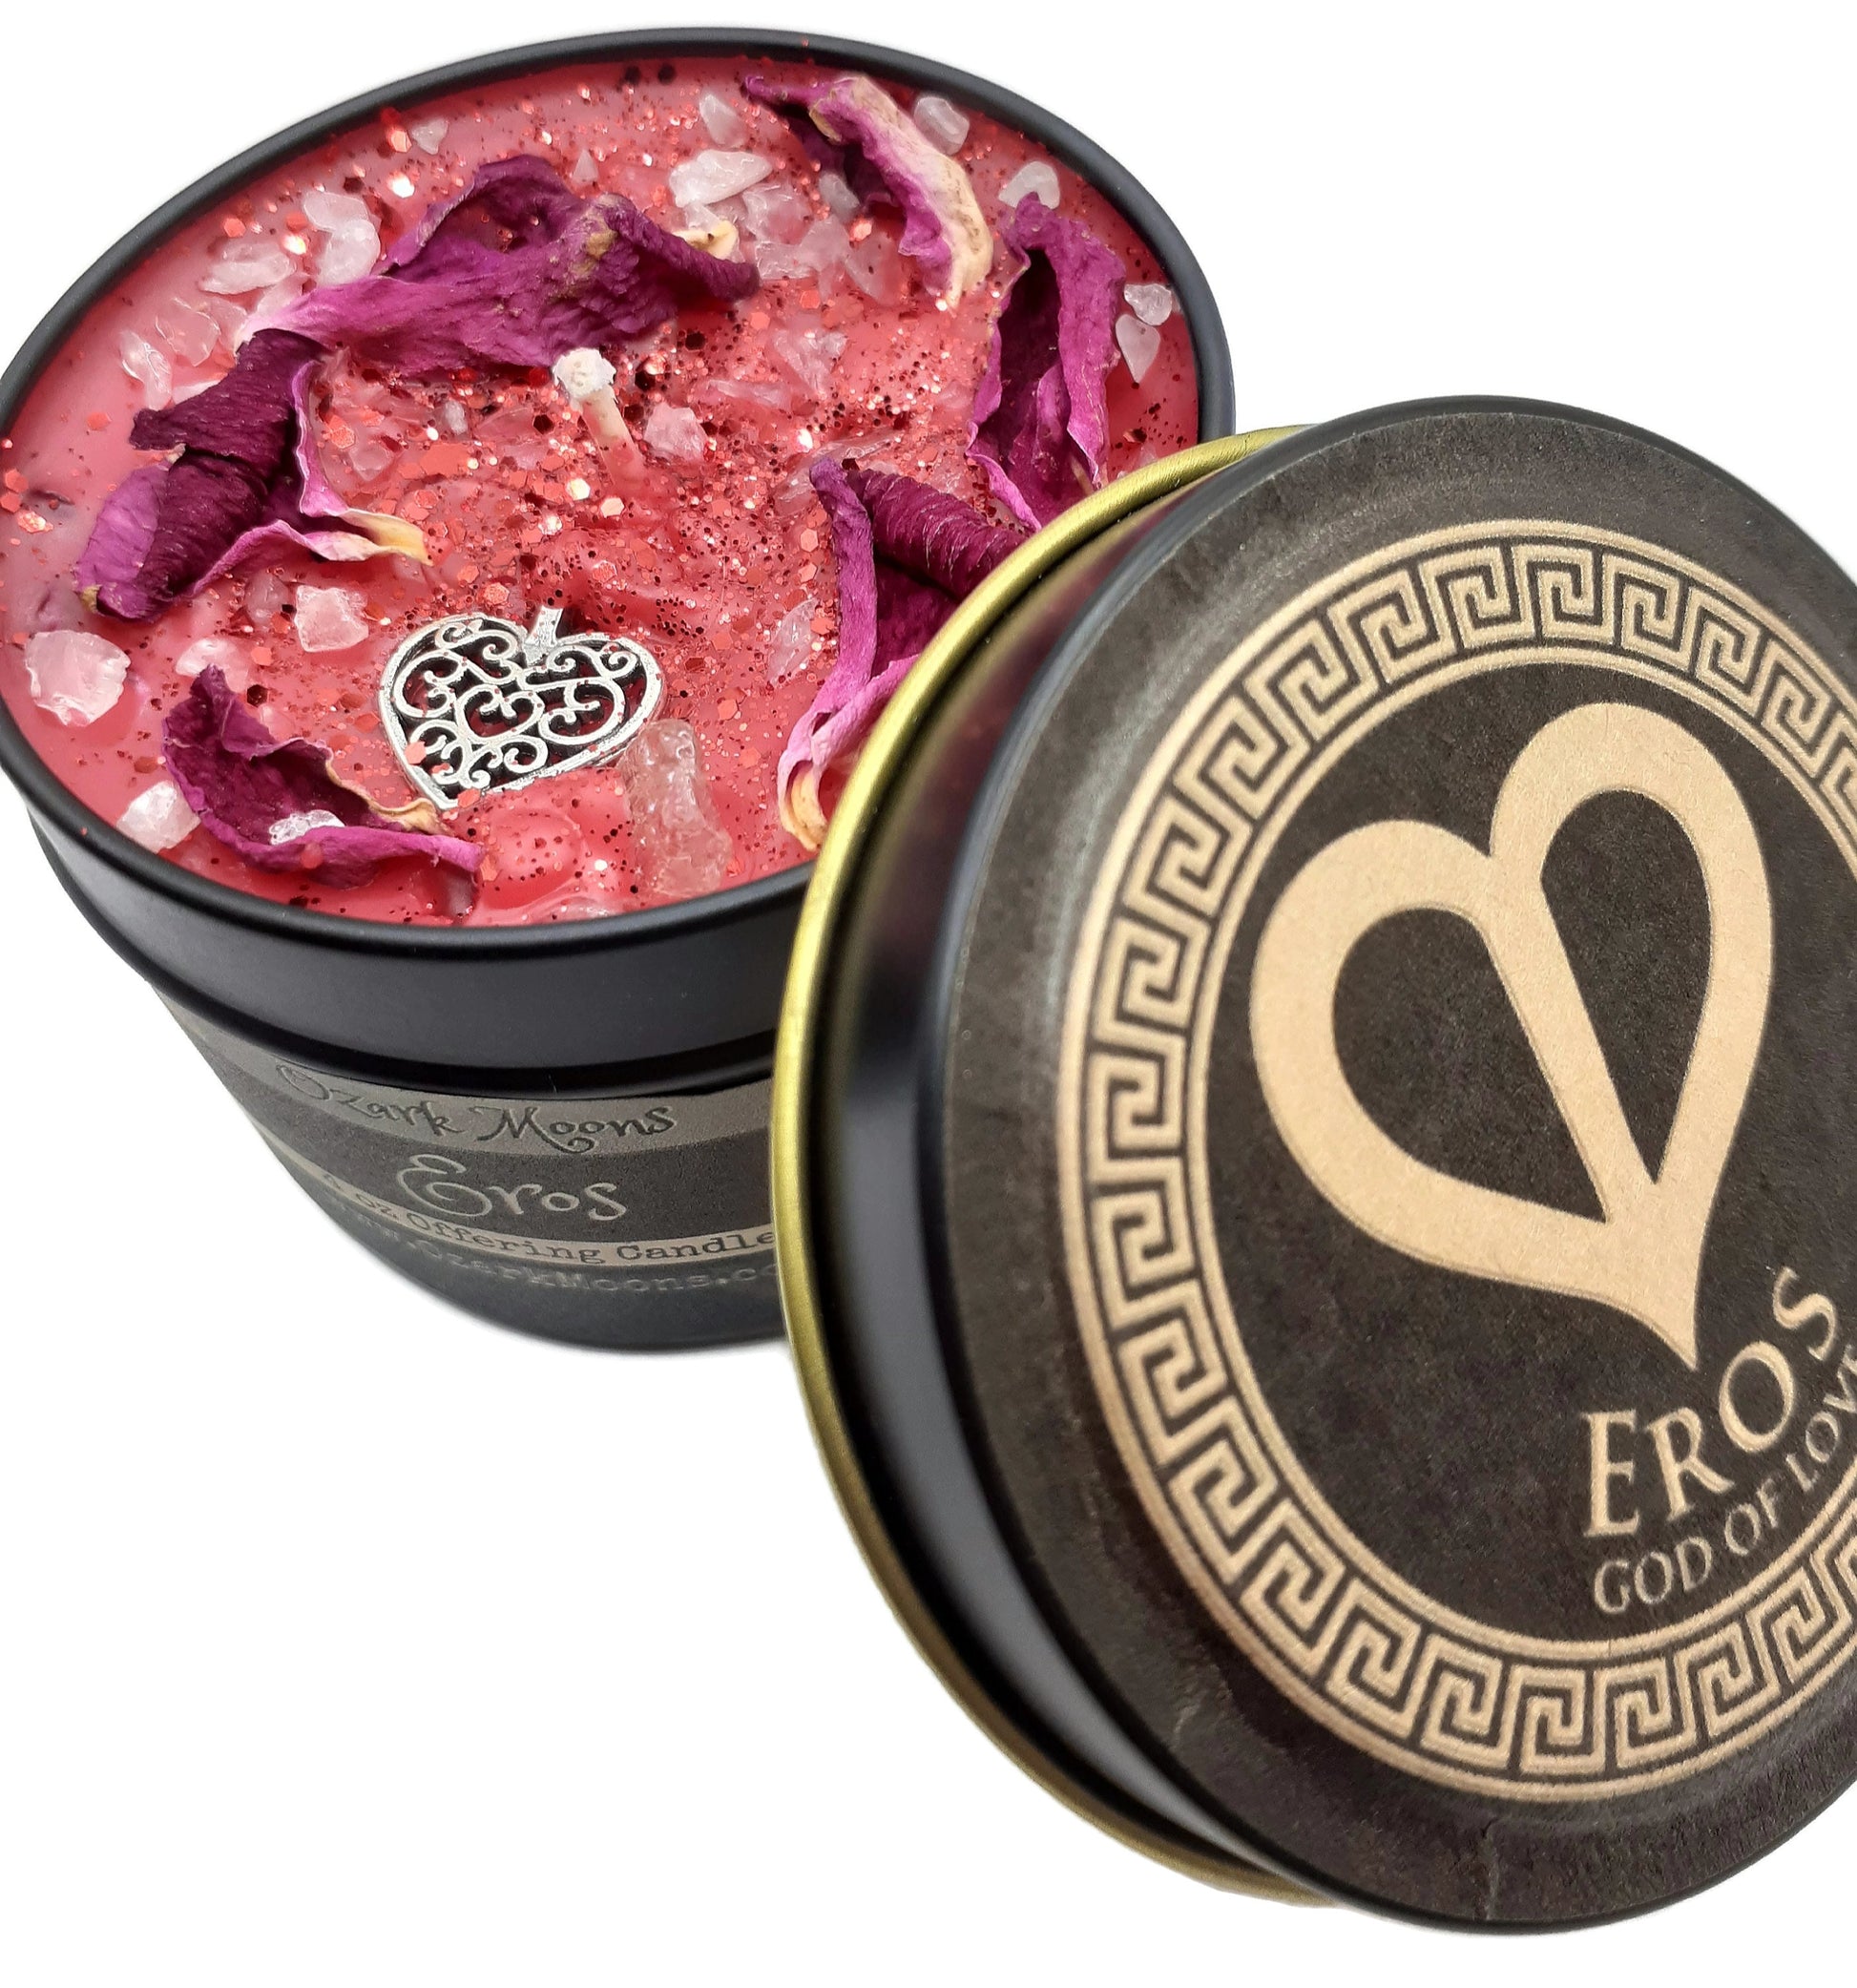 EROS 4 oz Candle Greek God of Love, Sex, and Sensuality With Rose Quartz and Red Rose Petals - Pagan Wiccan Offering for Cupid Erotic Lover